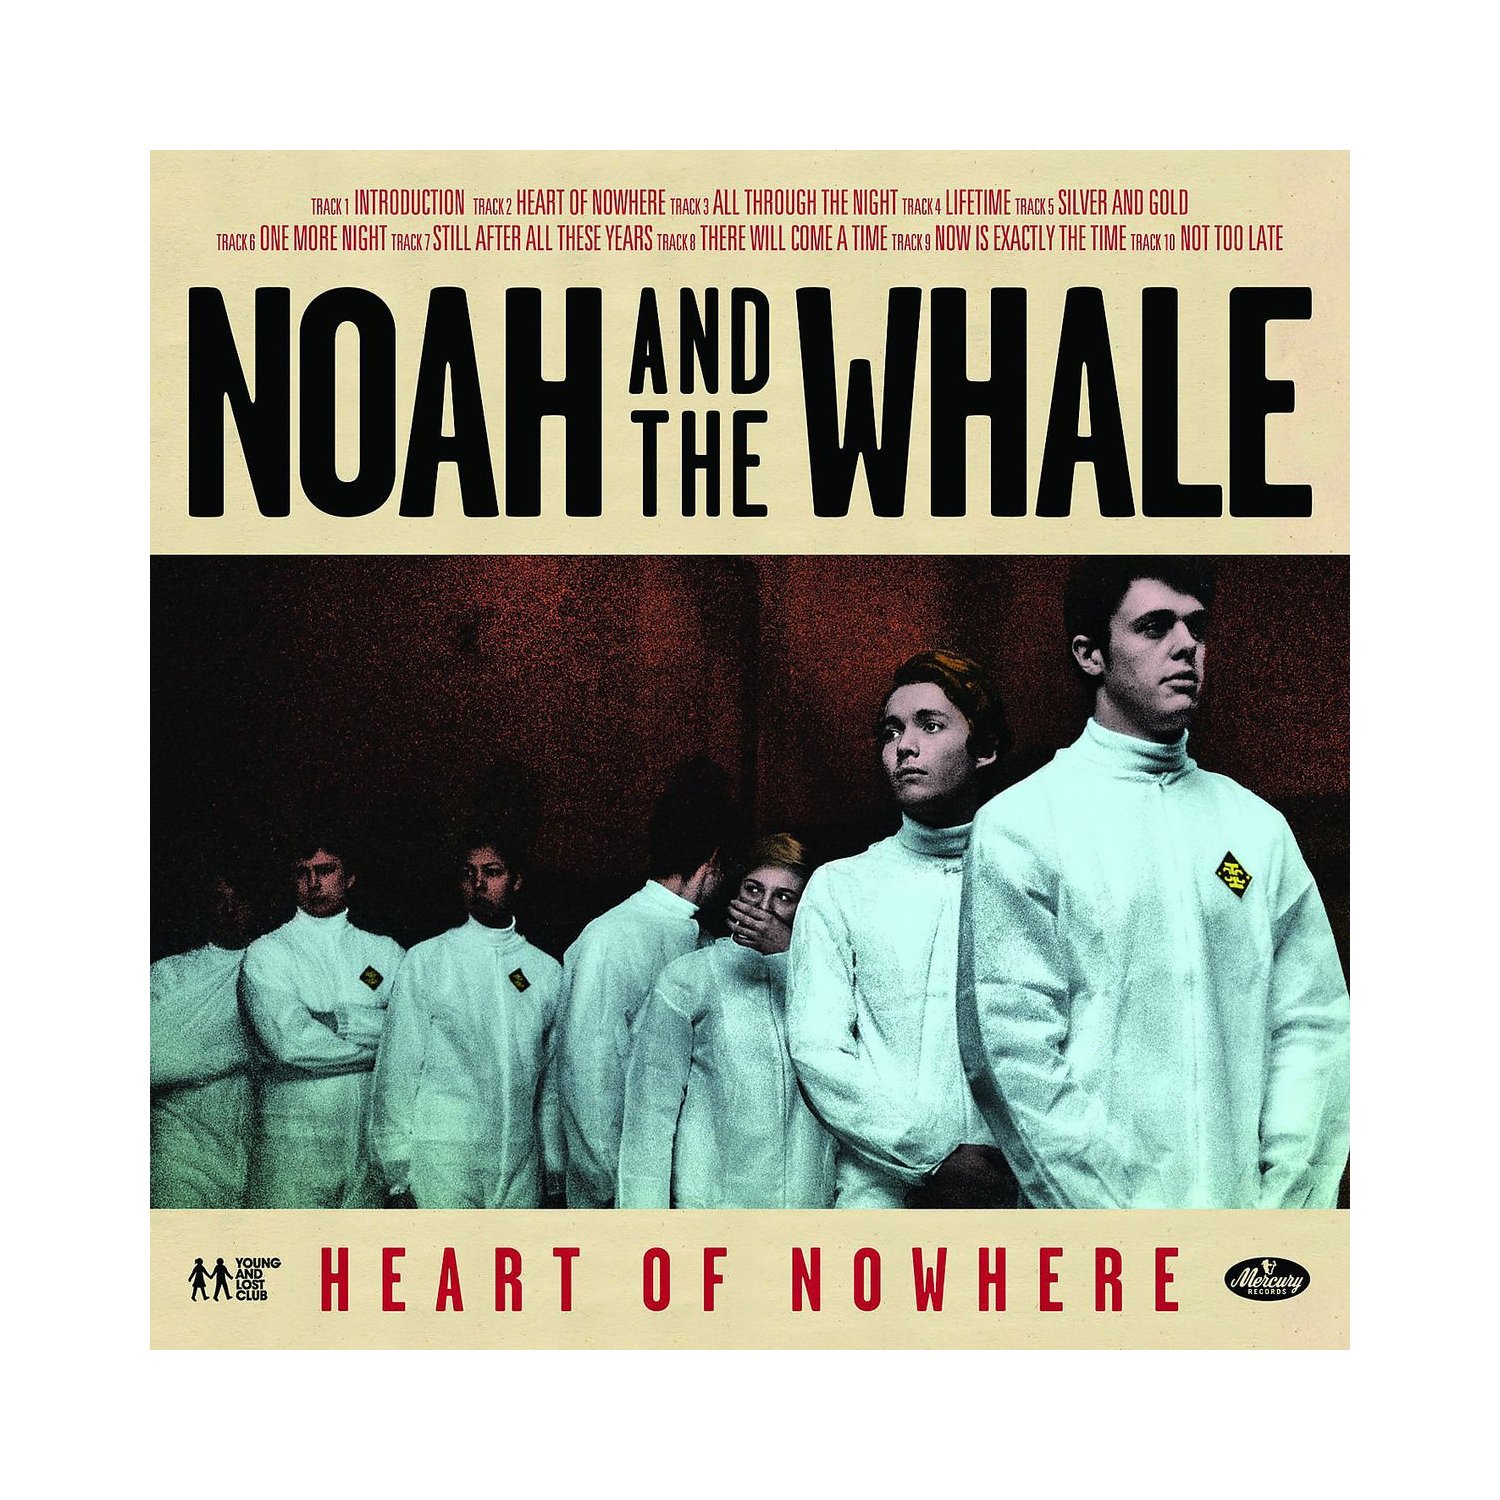 Noah and the Whale- Heart Of Nowhere